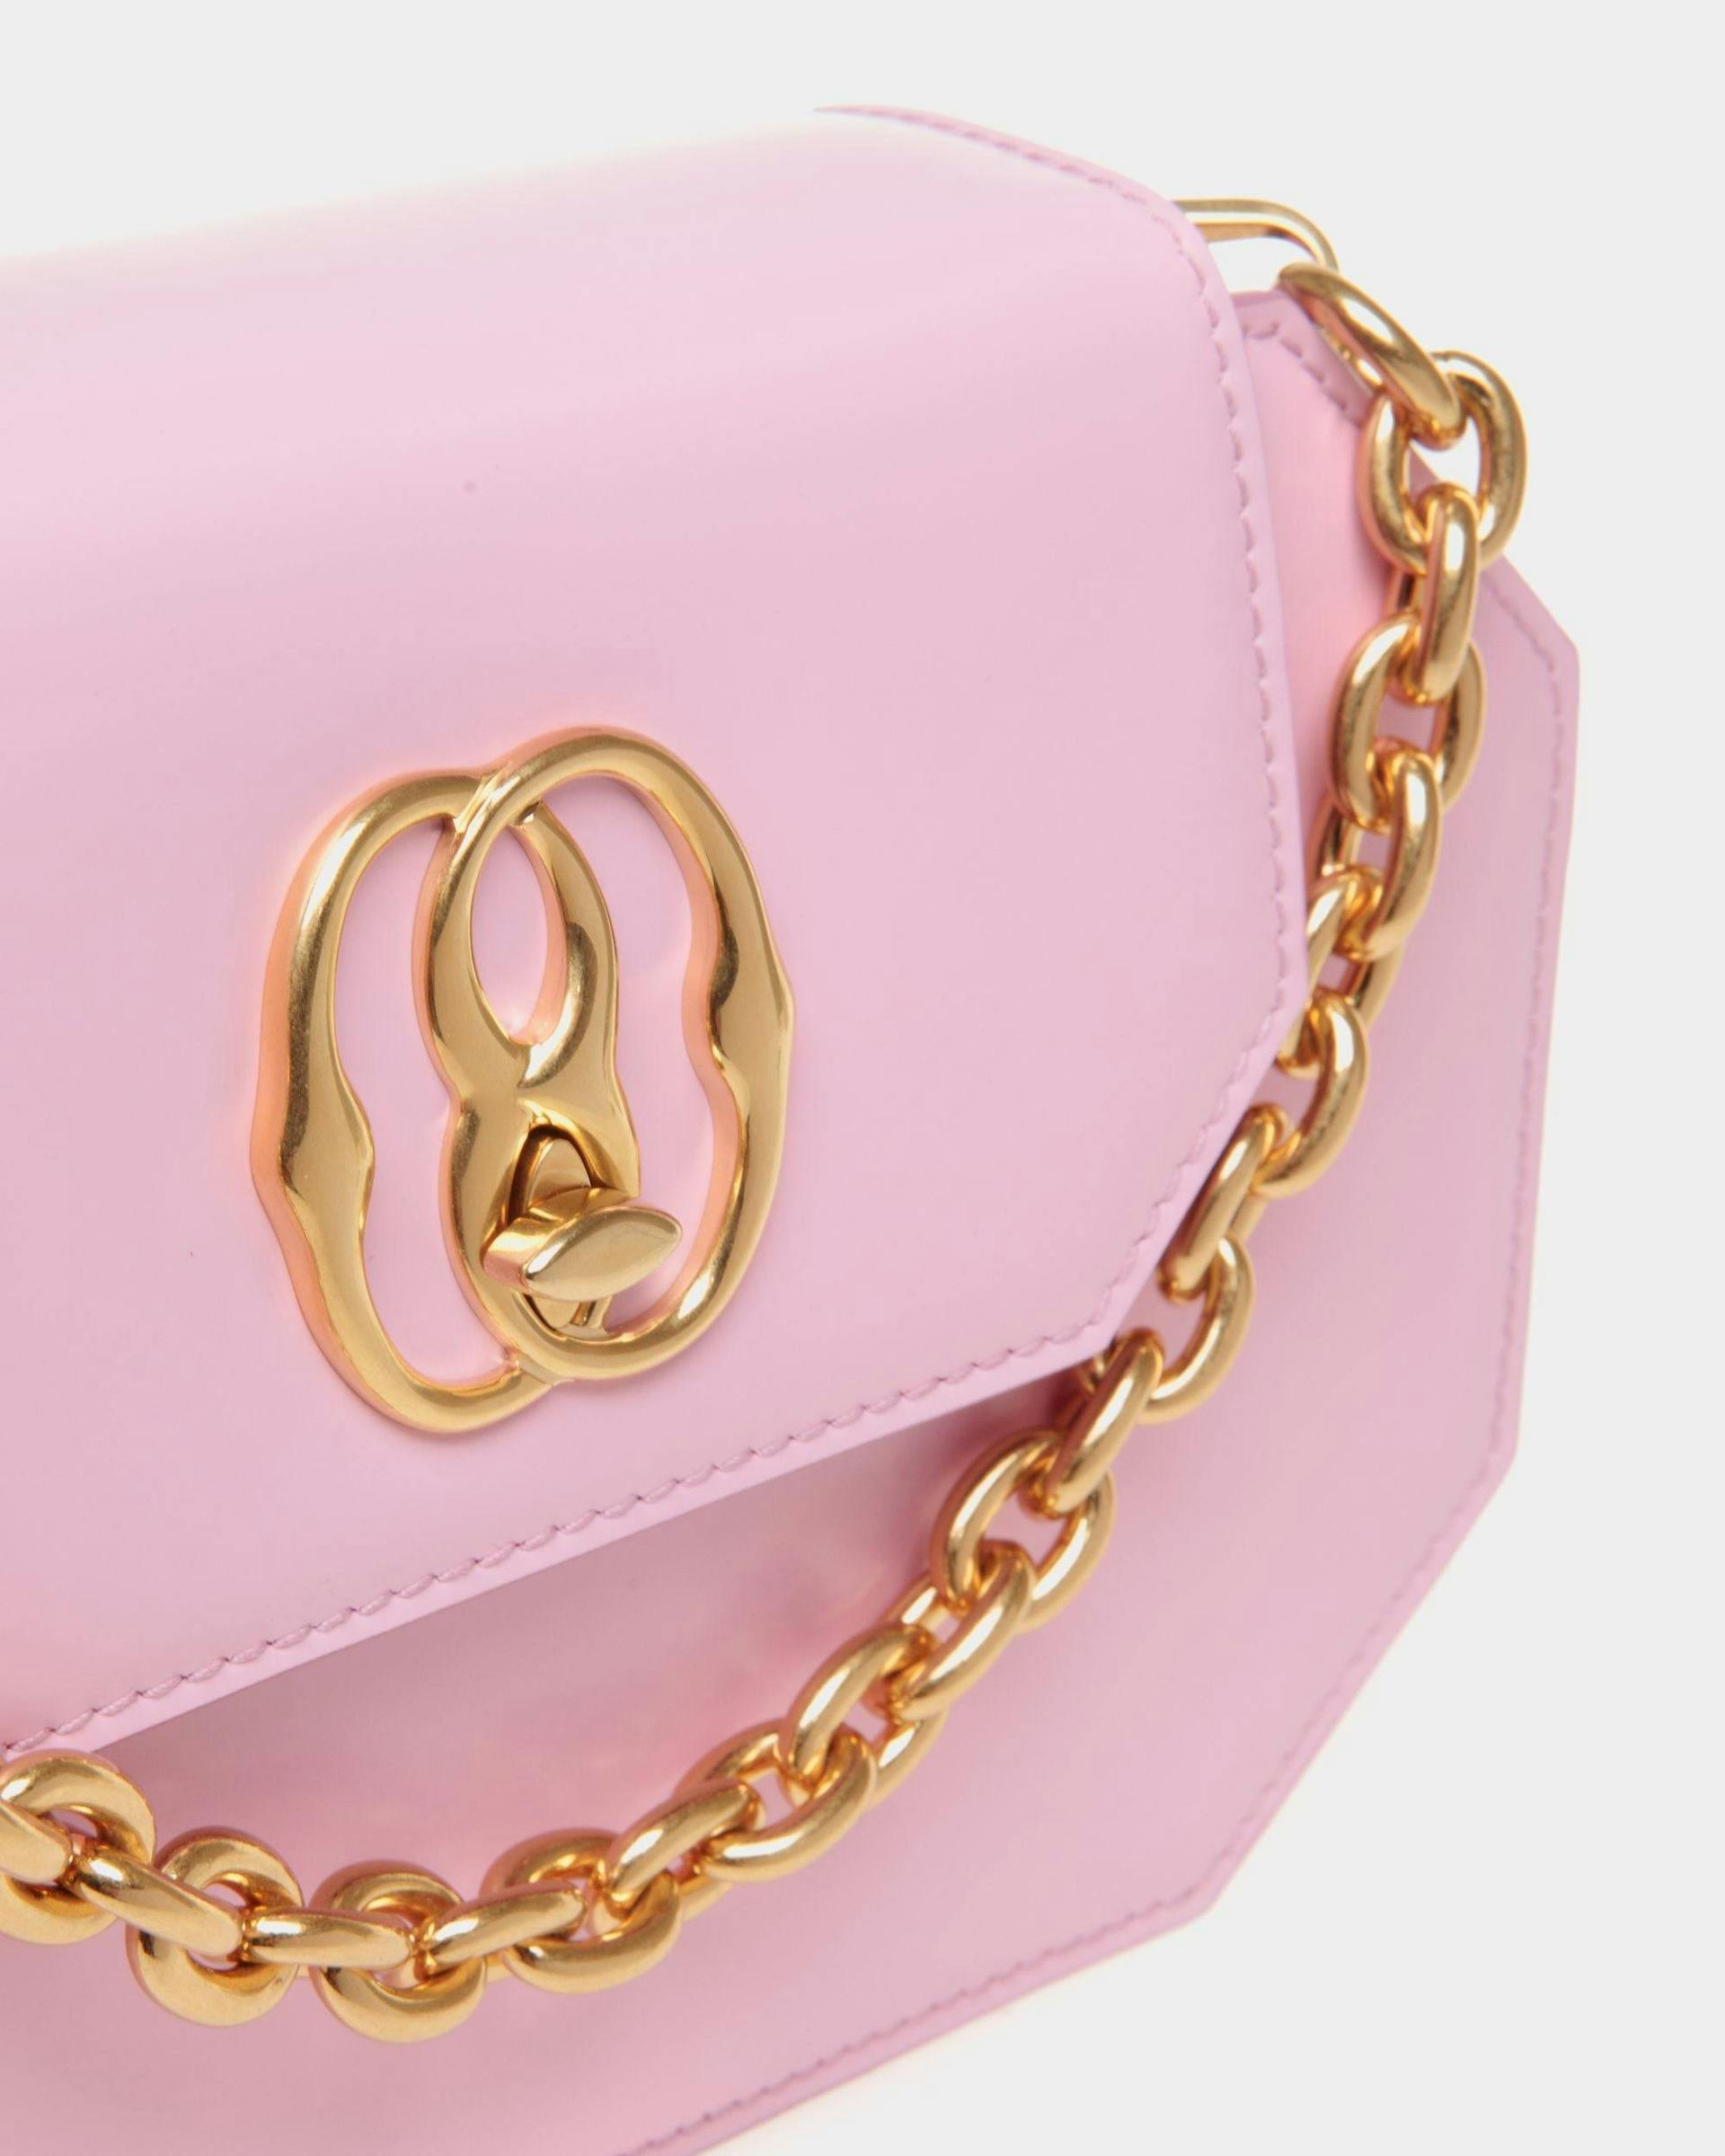 Women's Emblem Mini Bag in Pink Patent Leather | Bally | Still Life Detail